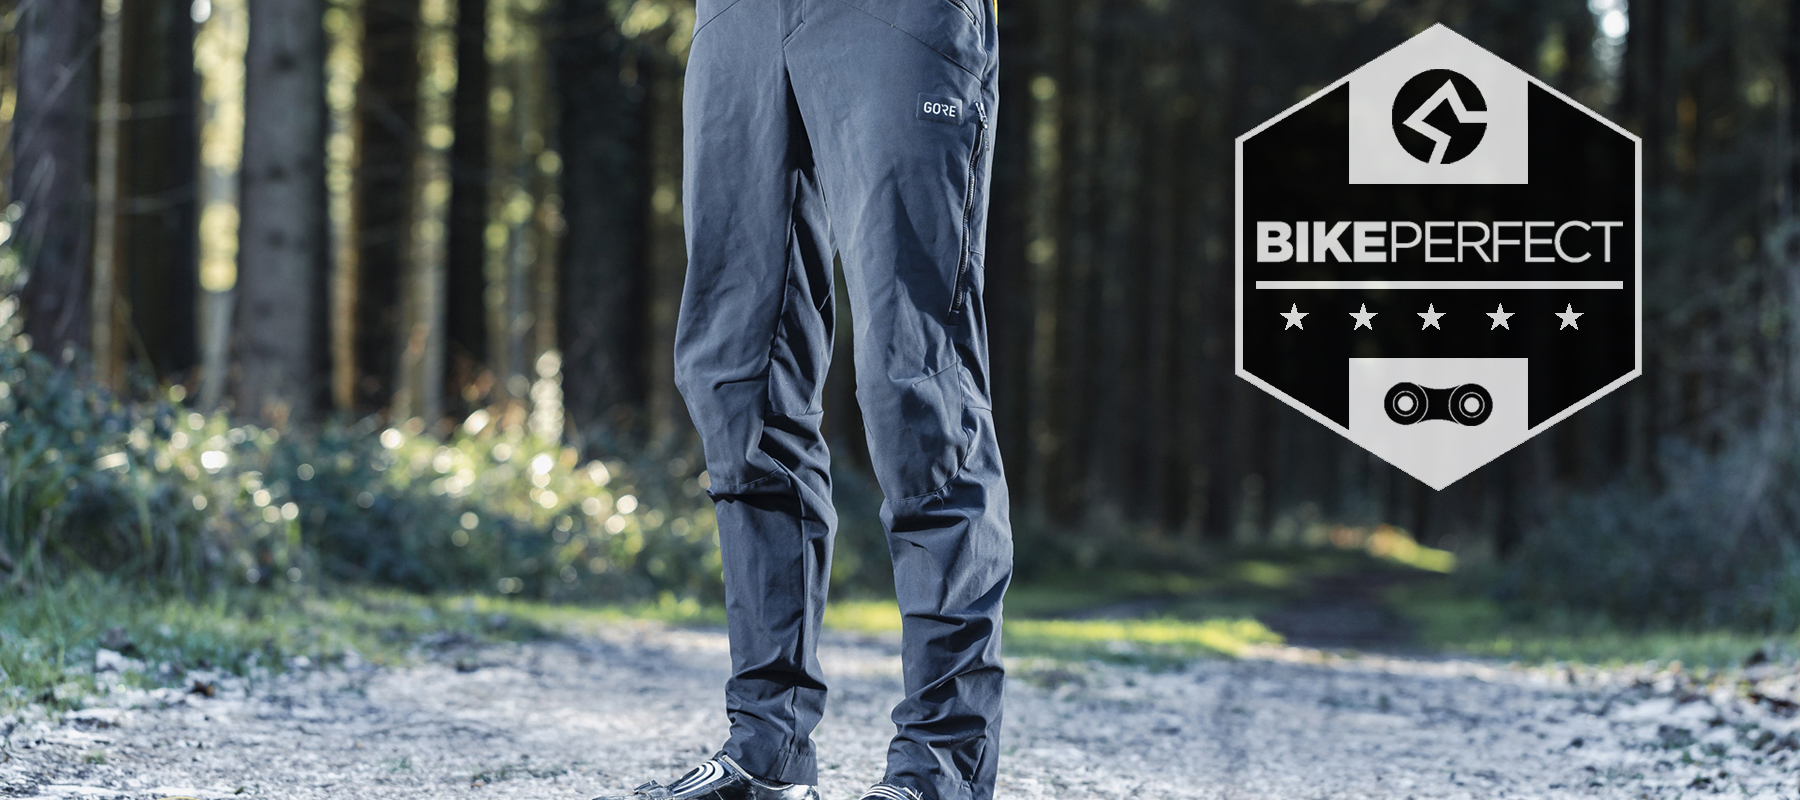 Victory® Relaxed-Fit Side-Elastic Cargo Pants